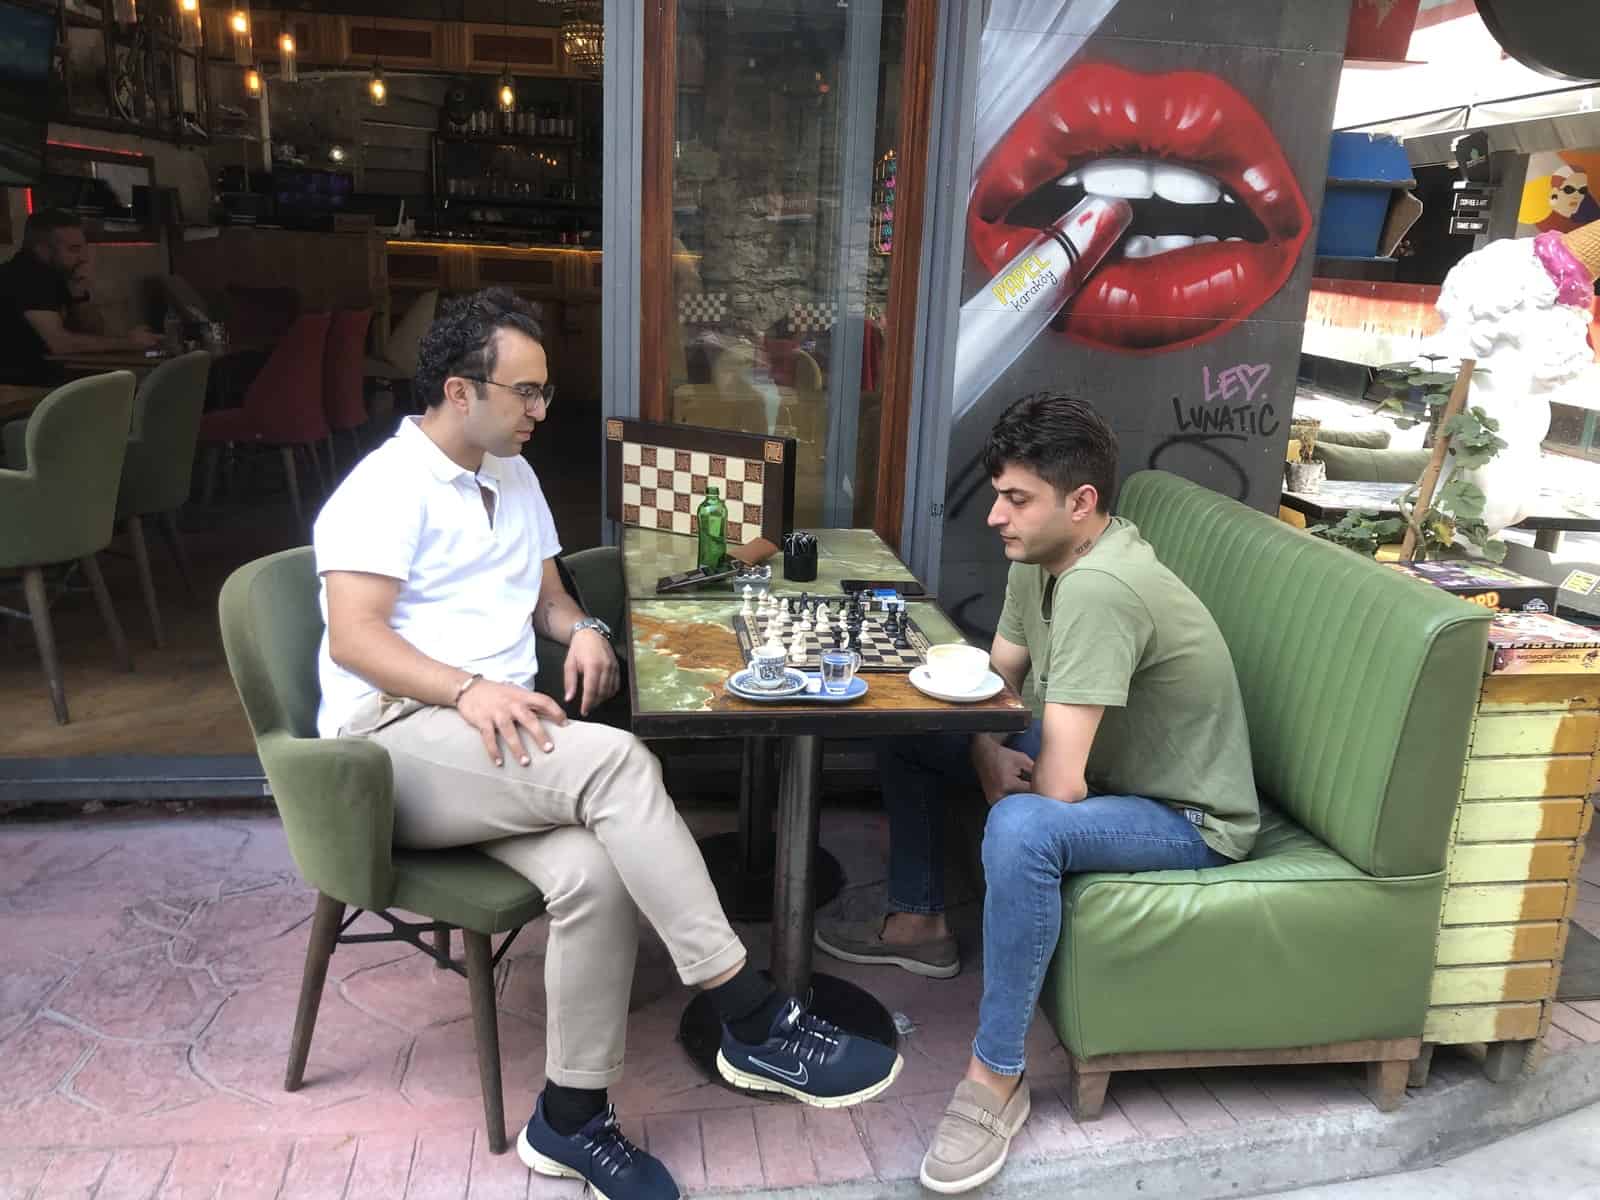 Papel, Karaköy compels you to sit down and play a game of chess.